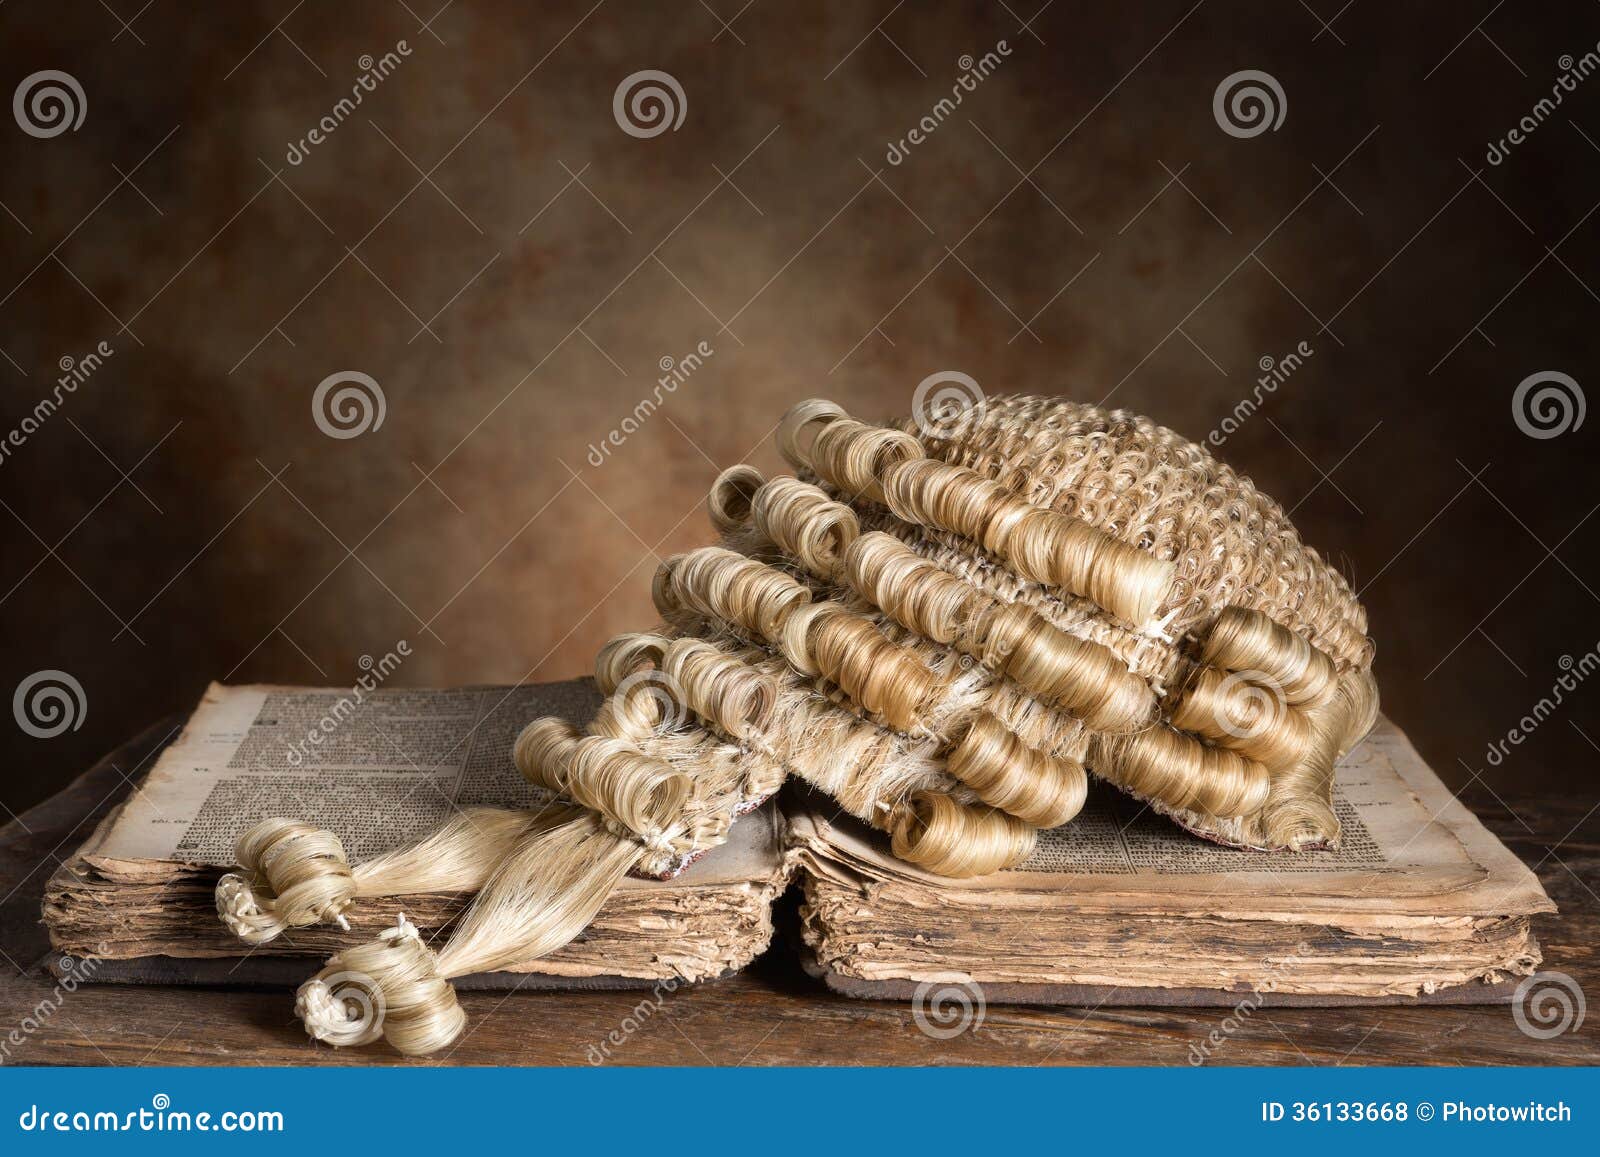 Barrister's Wig On Old Book Royalty Free Stock Photos 